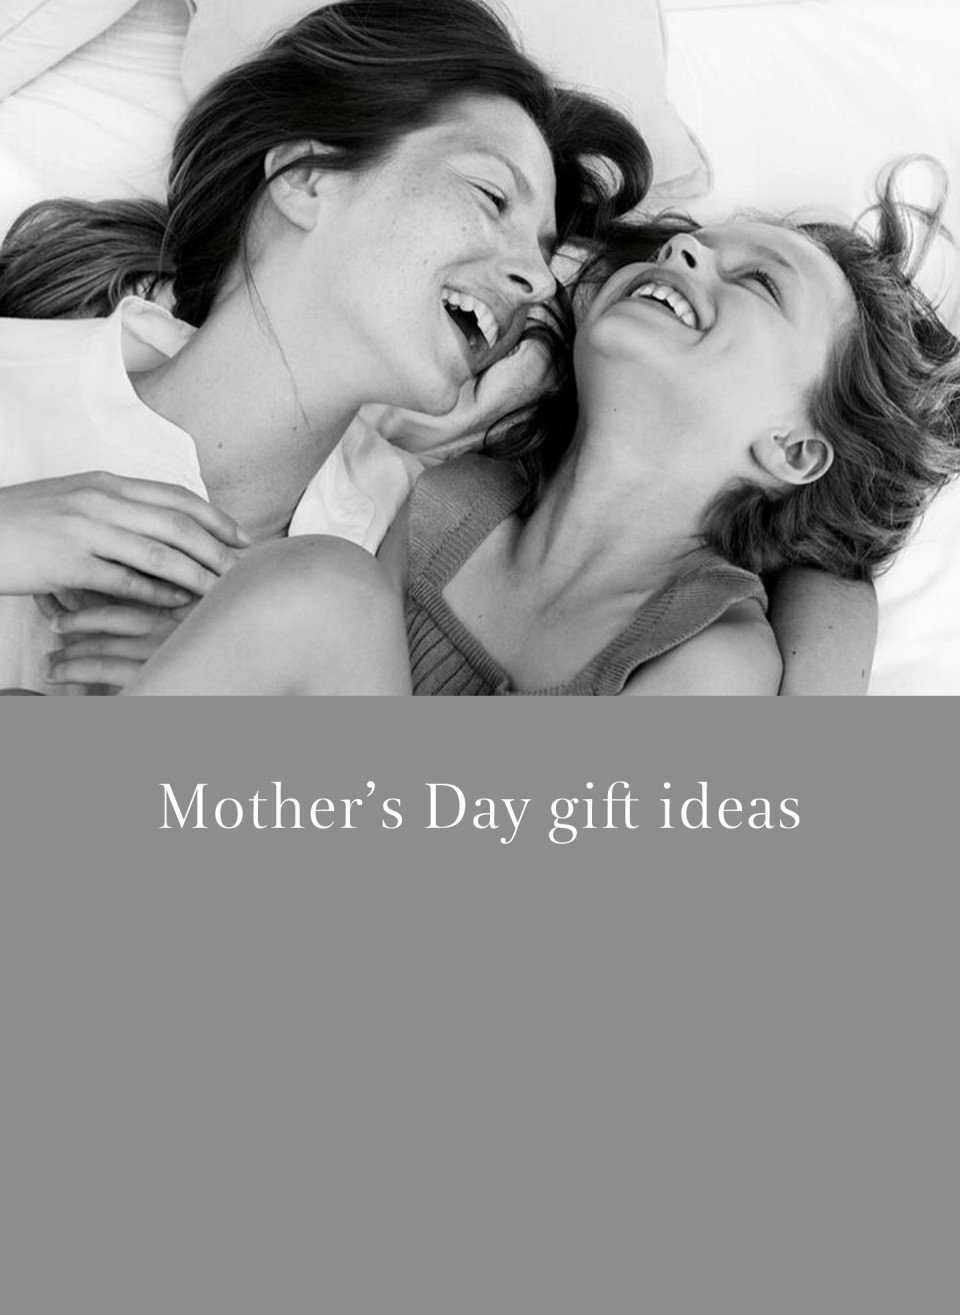 Clarins Canada Sale: FREE 5-Piece Custom Mother's Day Gift ($115 Value)  with Purchase + 6 FREE Samples - Canadian Freebies, Coupons, Deals,  Bargains, Flyers, Contests Canada Canadian Freebies, Coupons, Deals,  Bargains, Flyers, Contests Canada